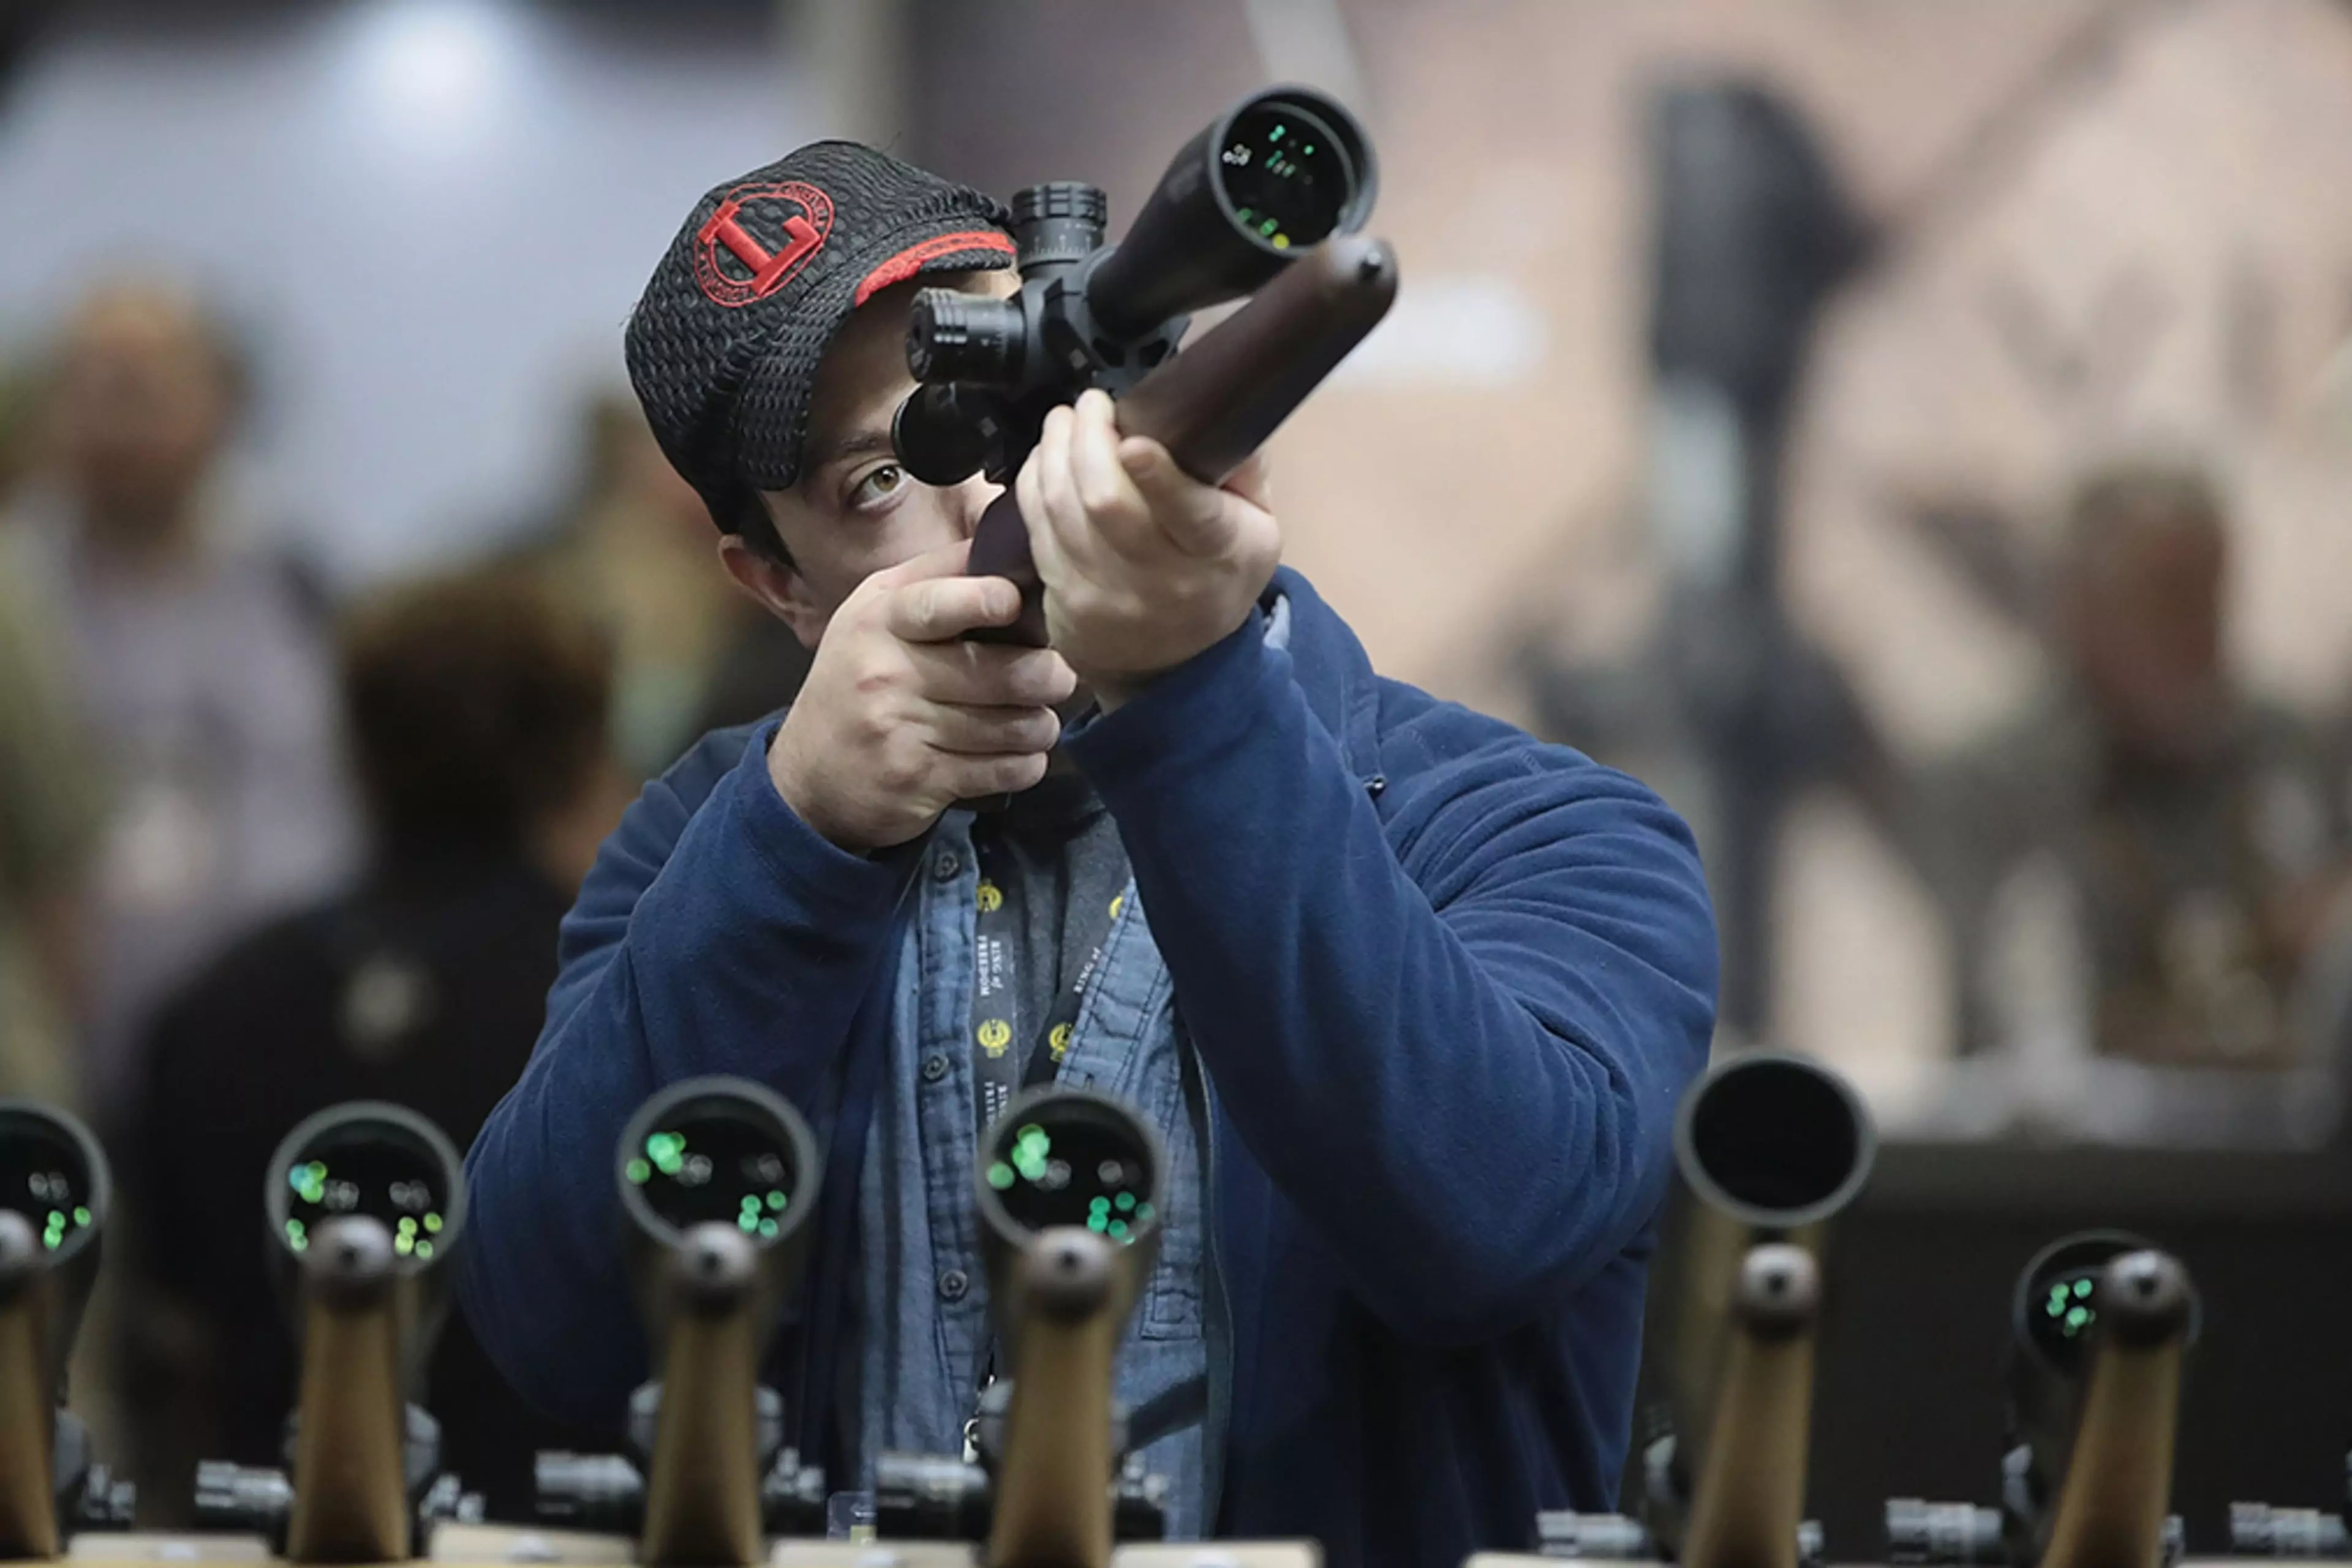 A gun enthusiast looks at a rifle scope during a 2019 National Rifle Association annual convention.